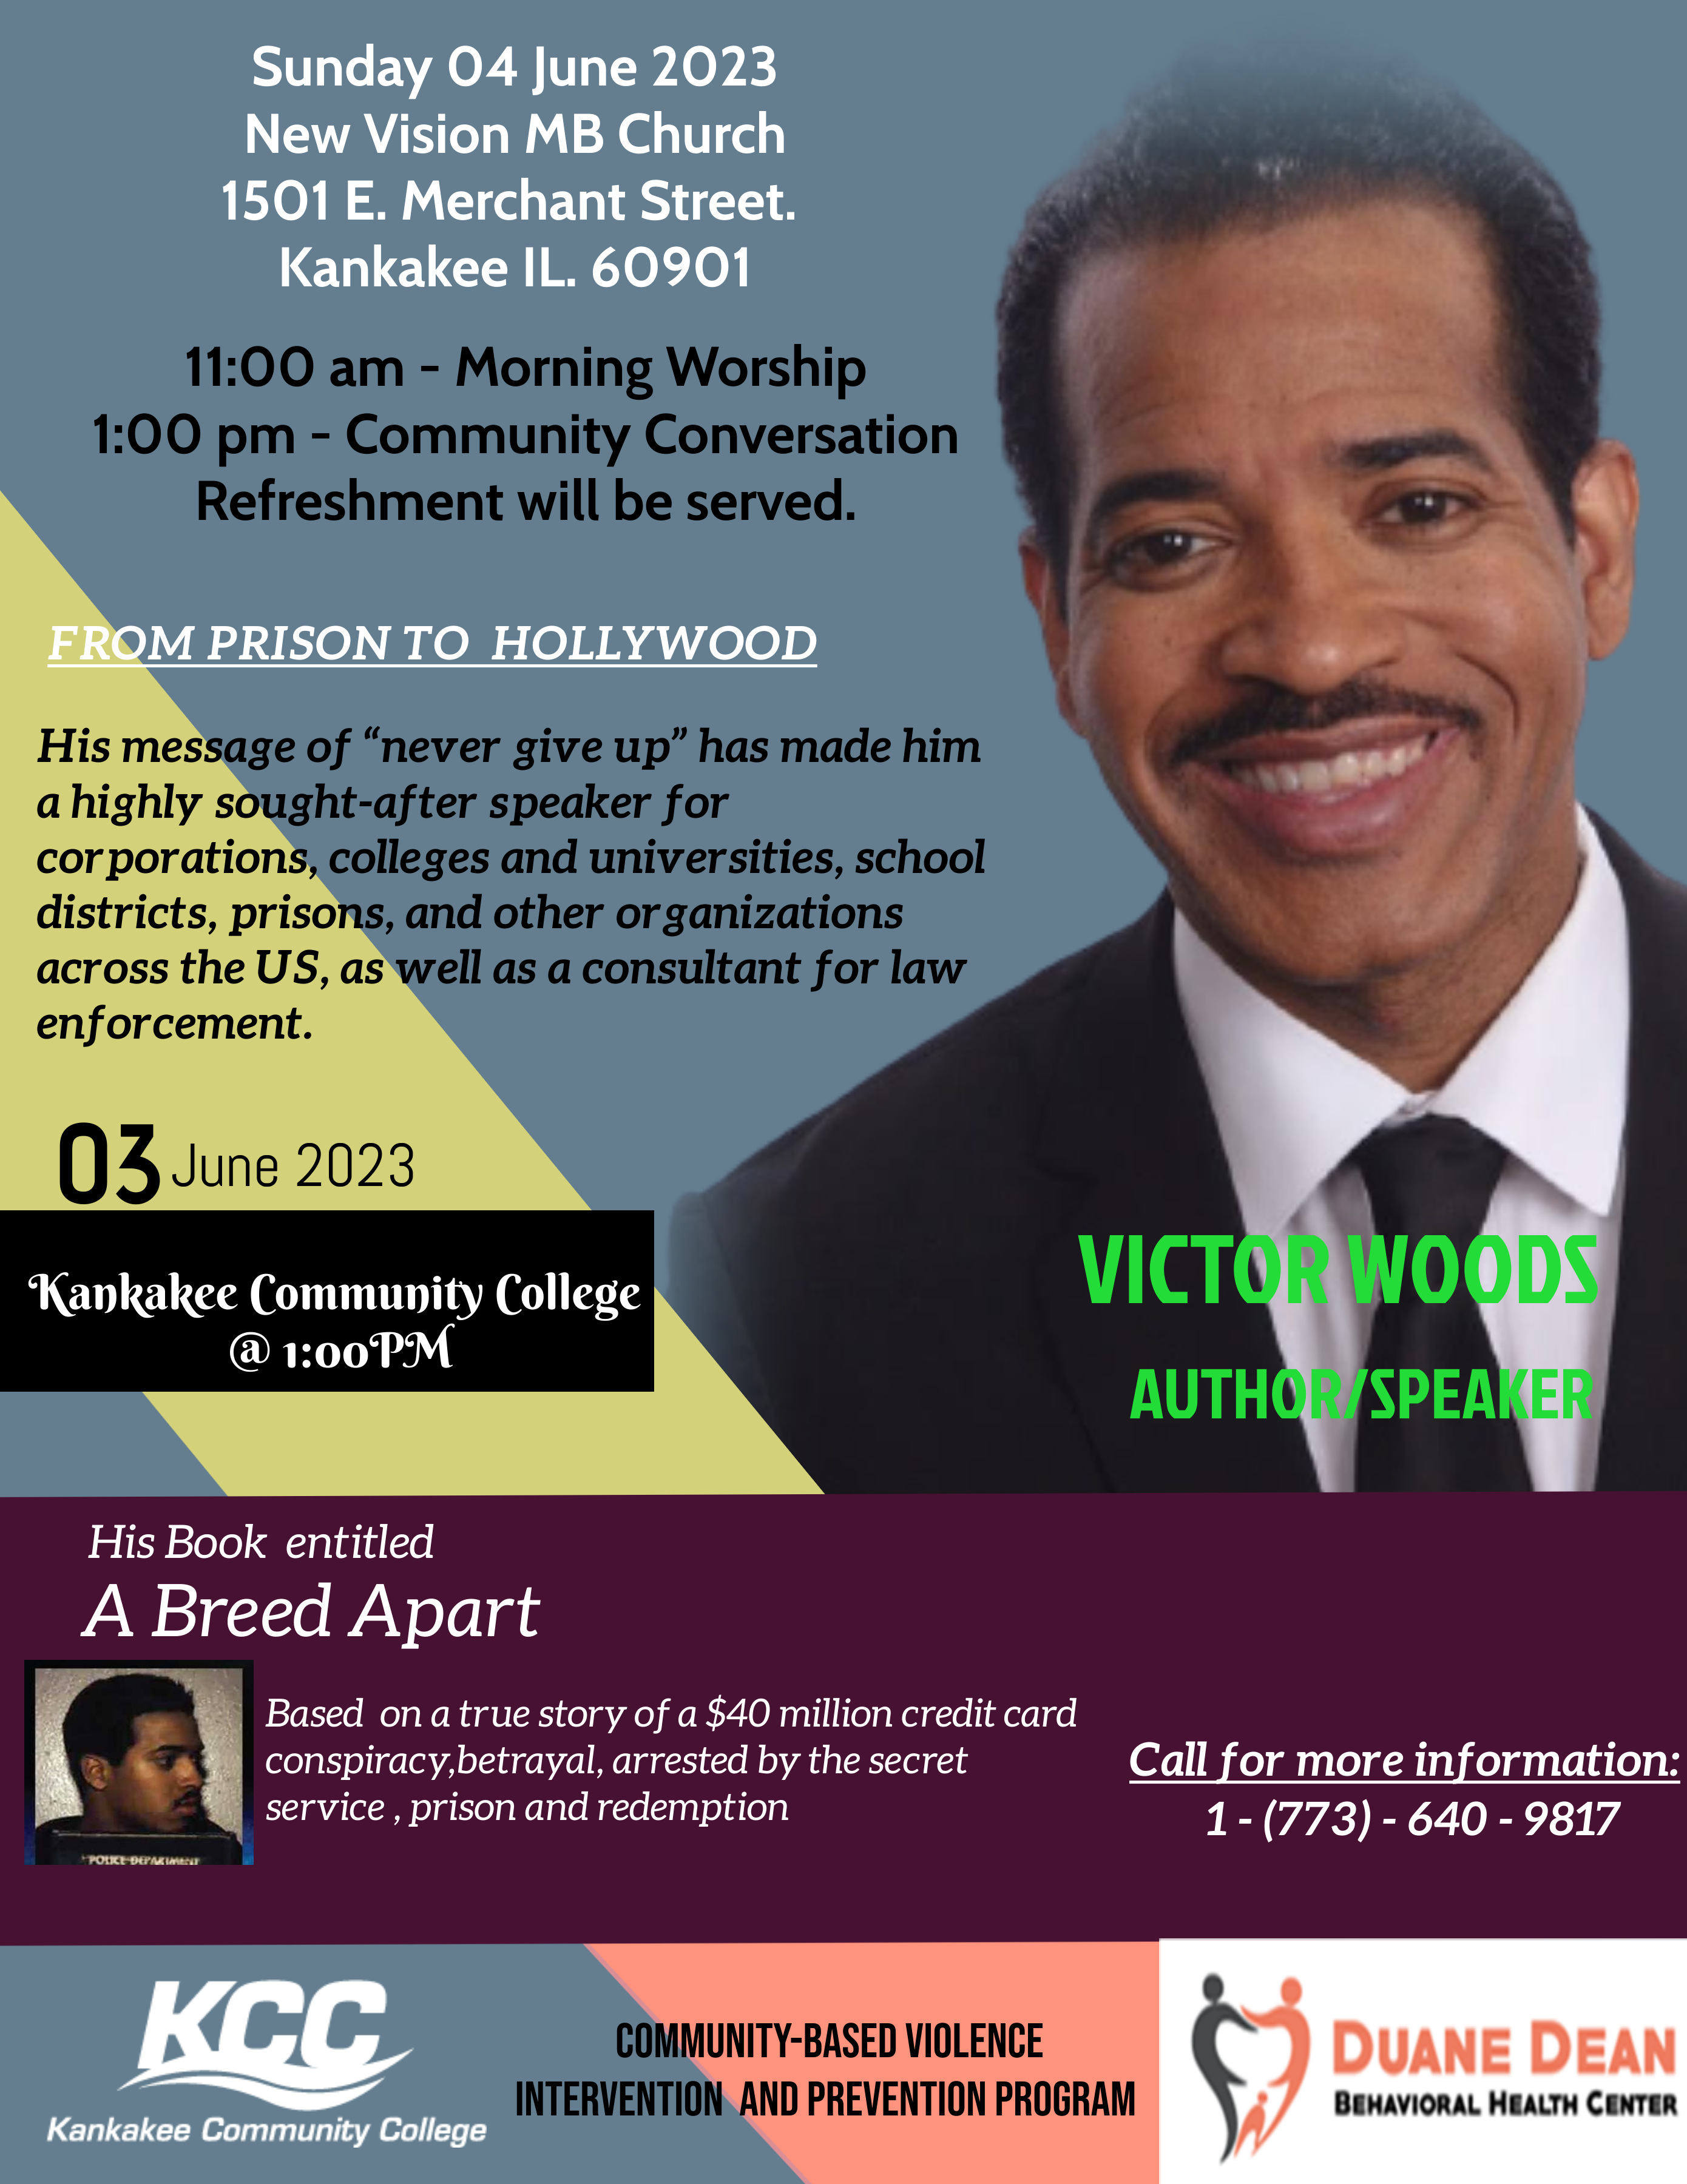 Victor Woods coming to Kankakee IL